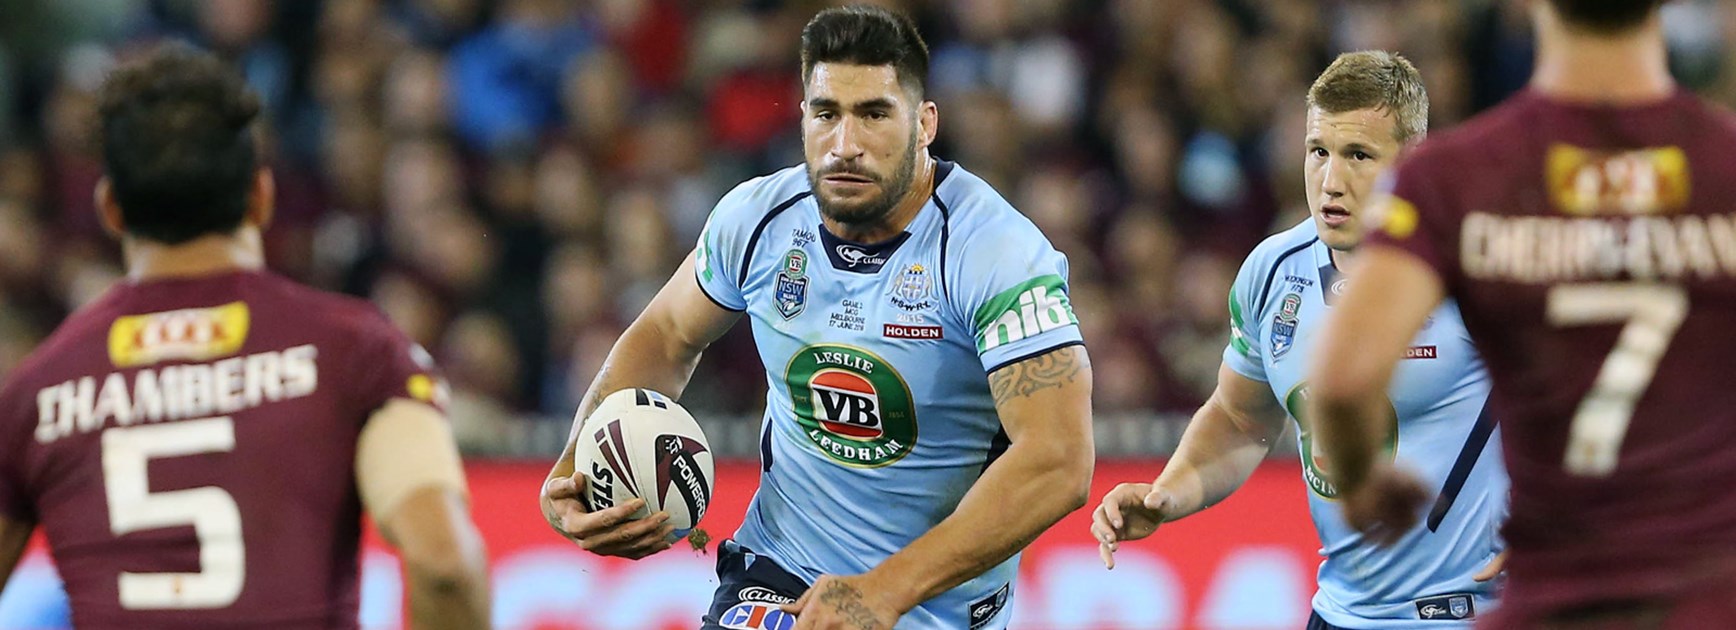 NSW prop James Tamou was again powerful for the Blues in their Origin II win.